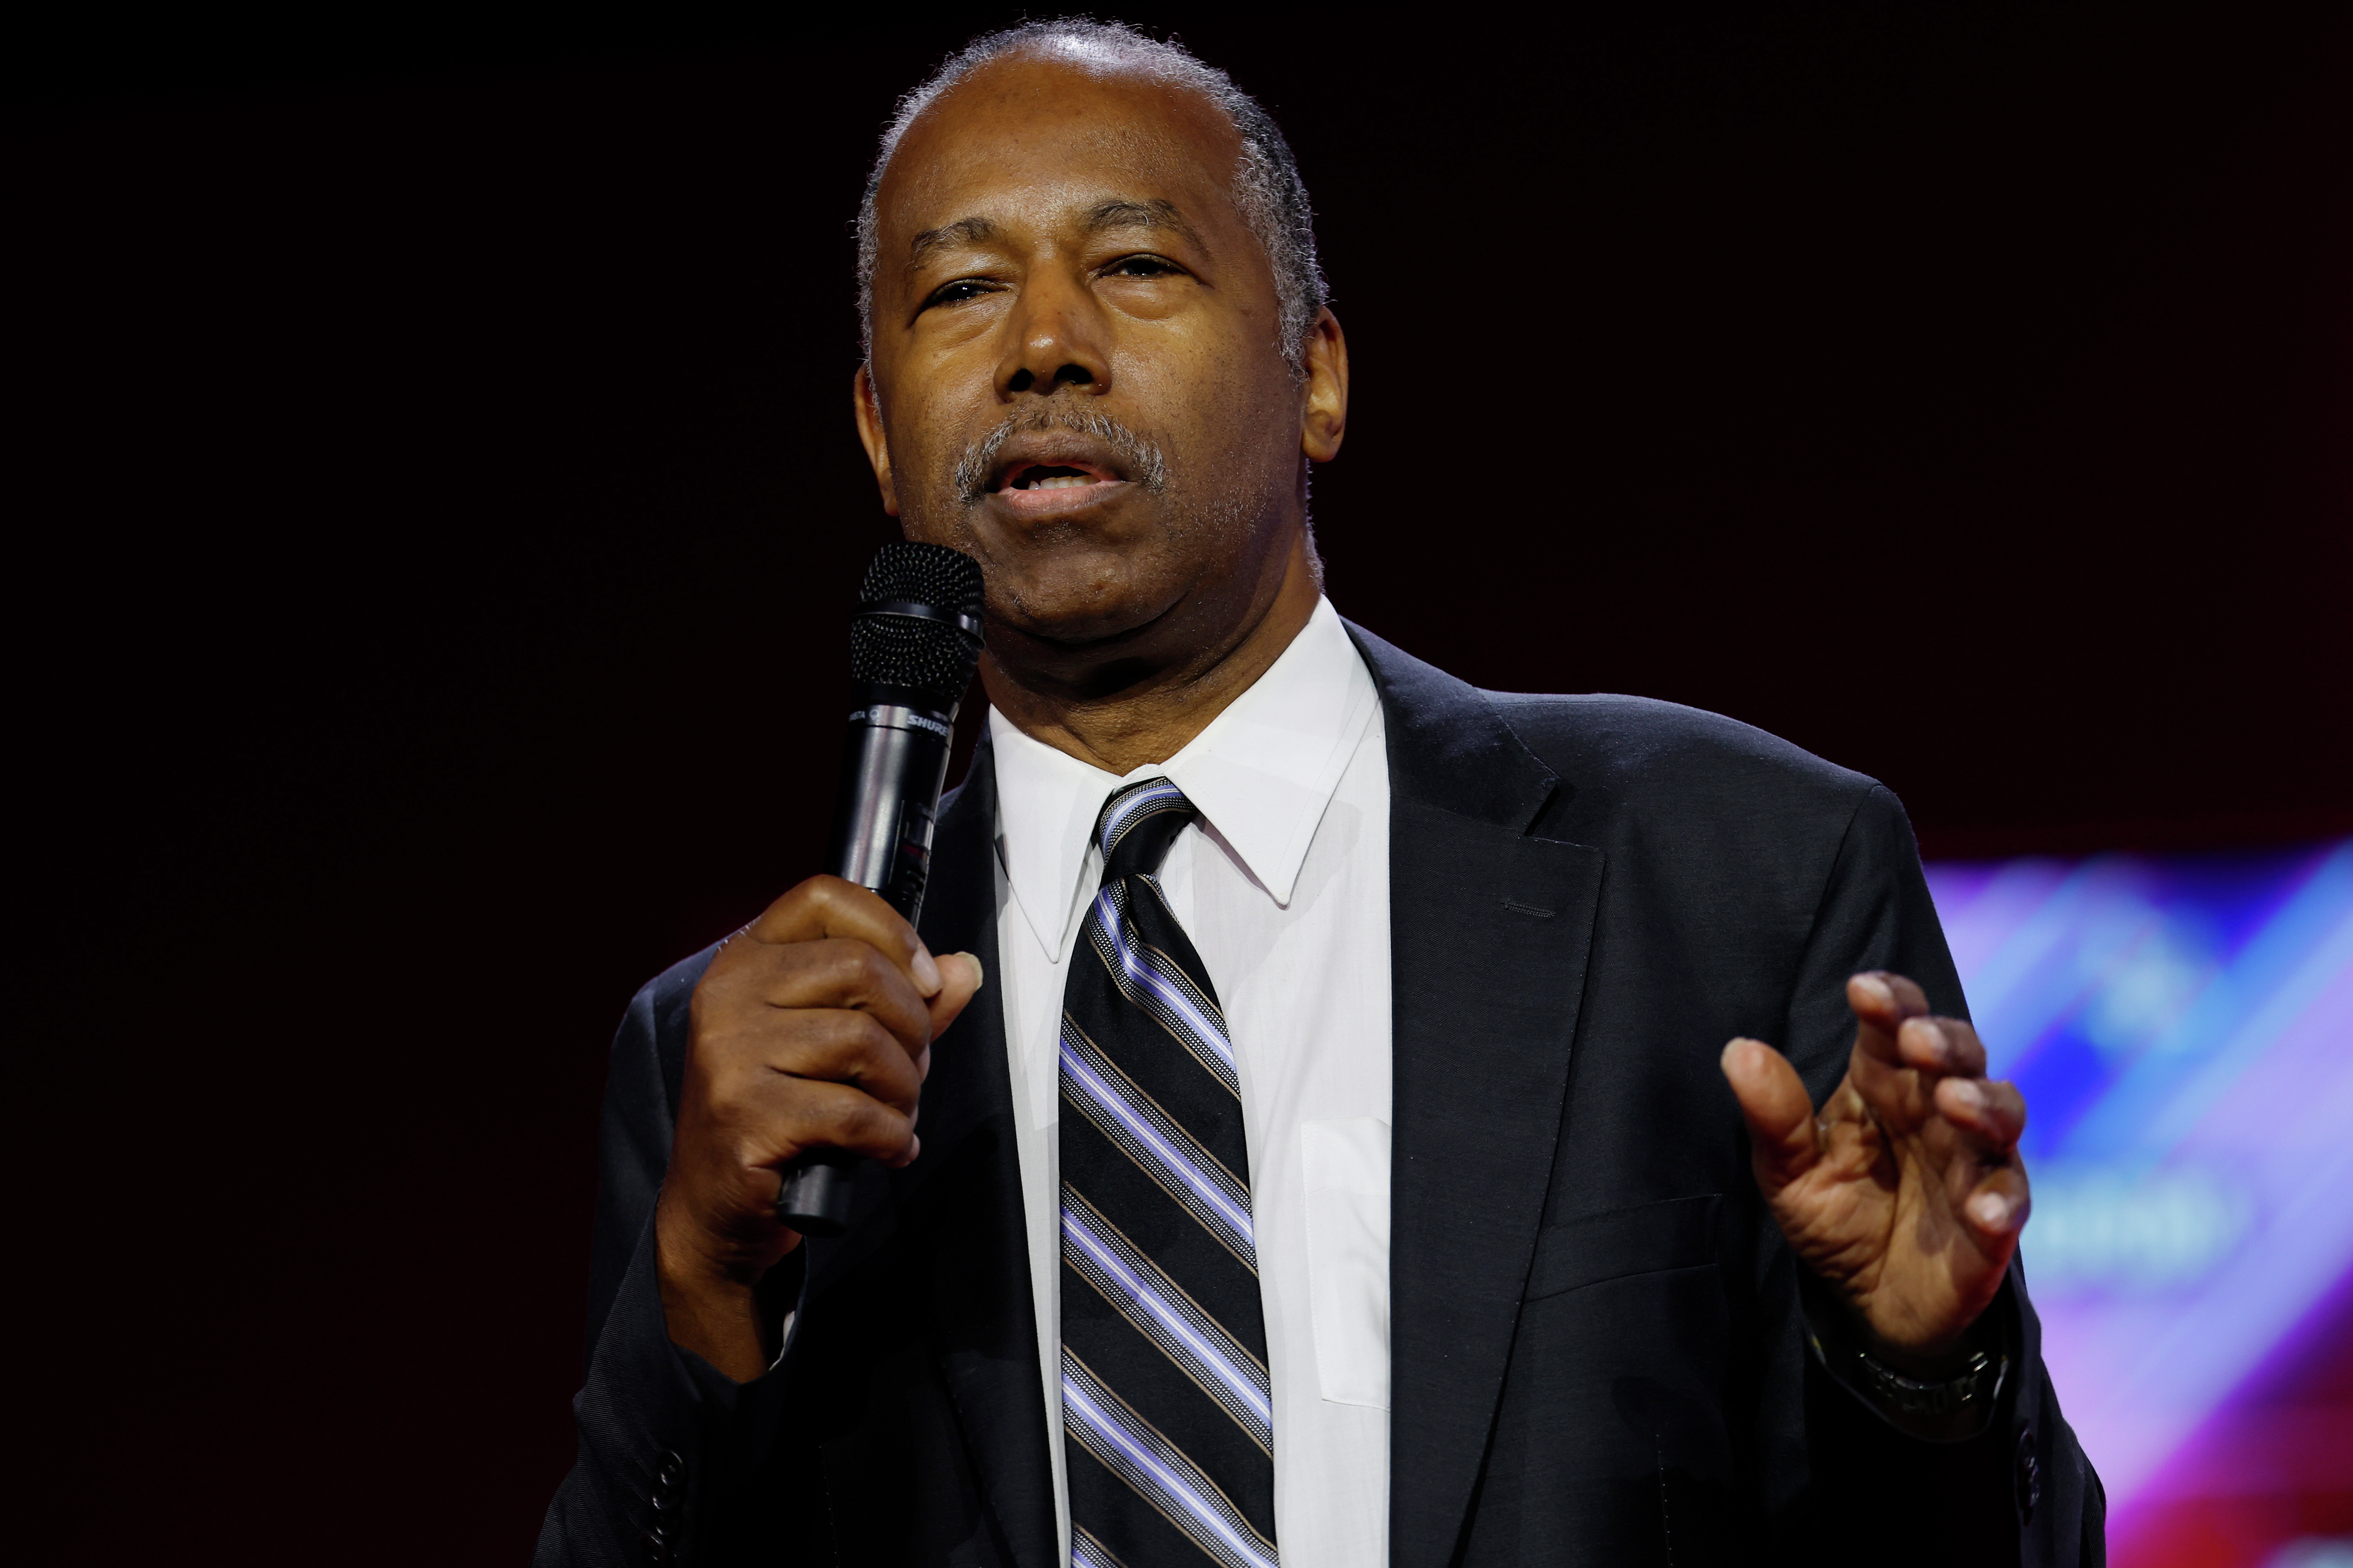 Dr. Ben Carson: Ready To Serve As Trump's VP If Asked